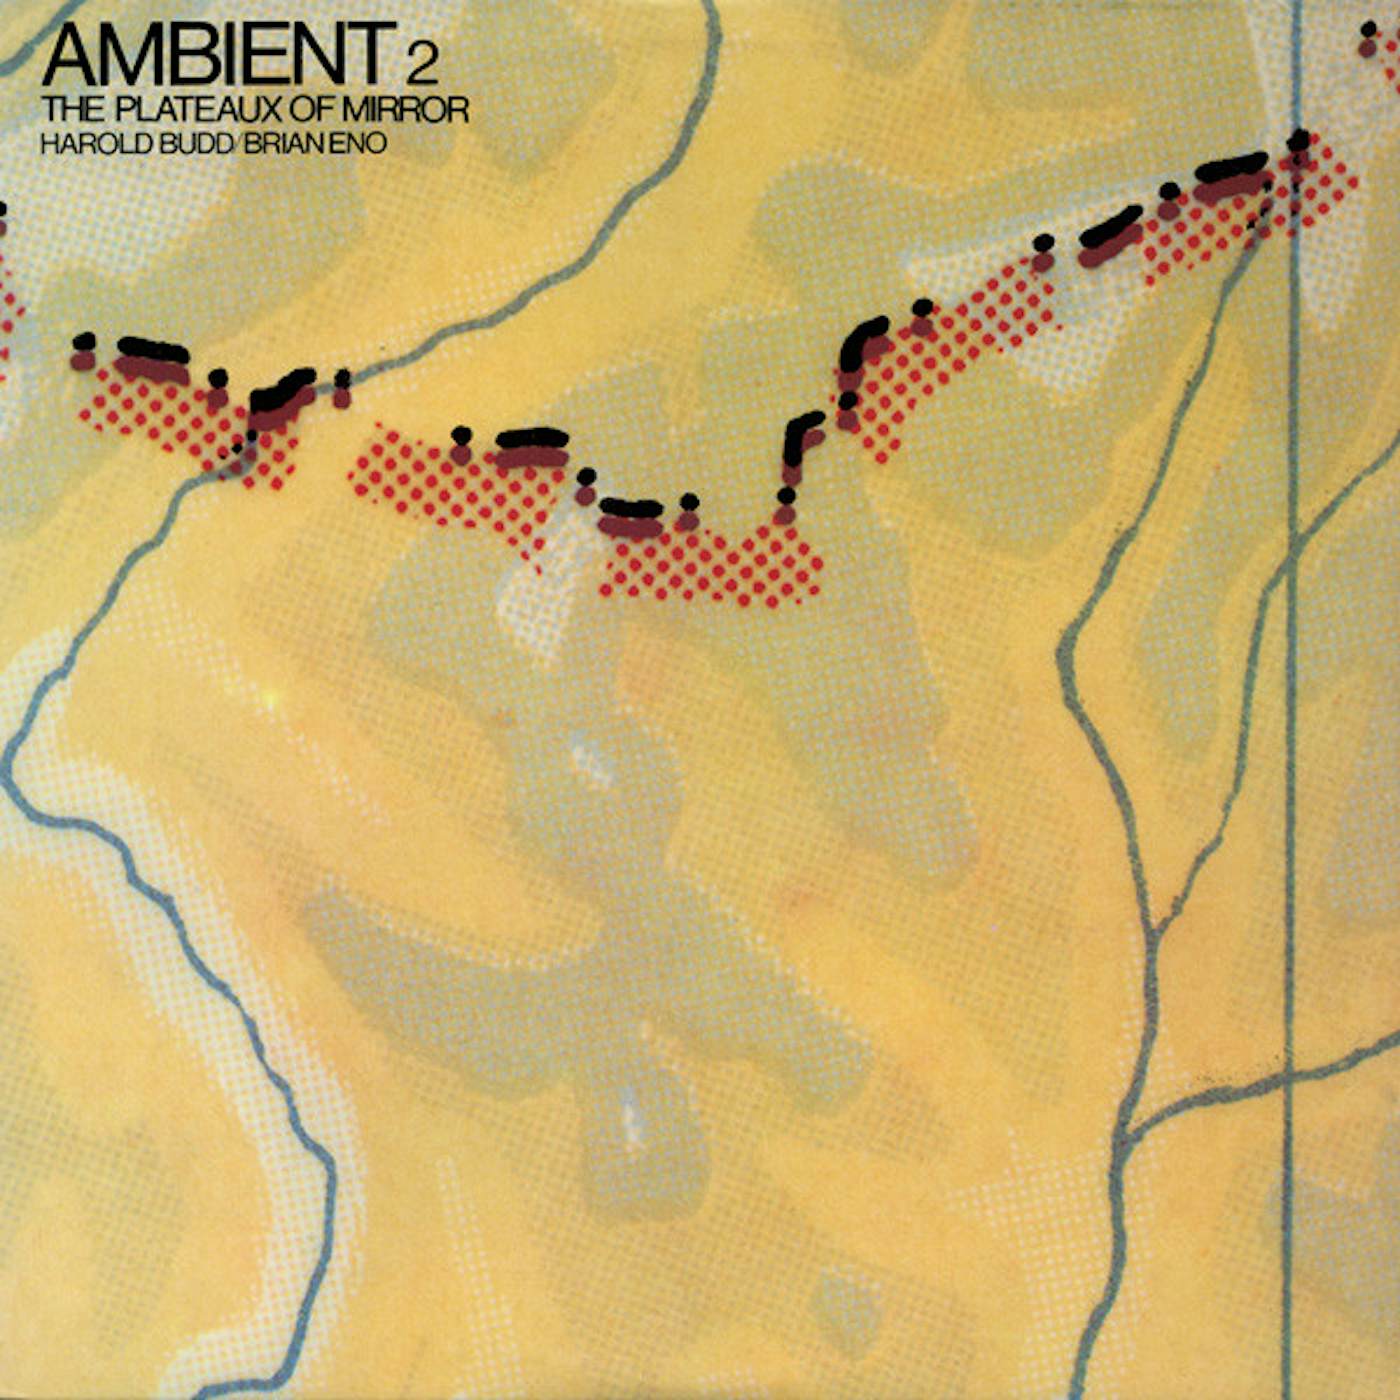 Brian Eno AMBIENT 2 / PLATEAUX OF MIRROR CD